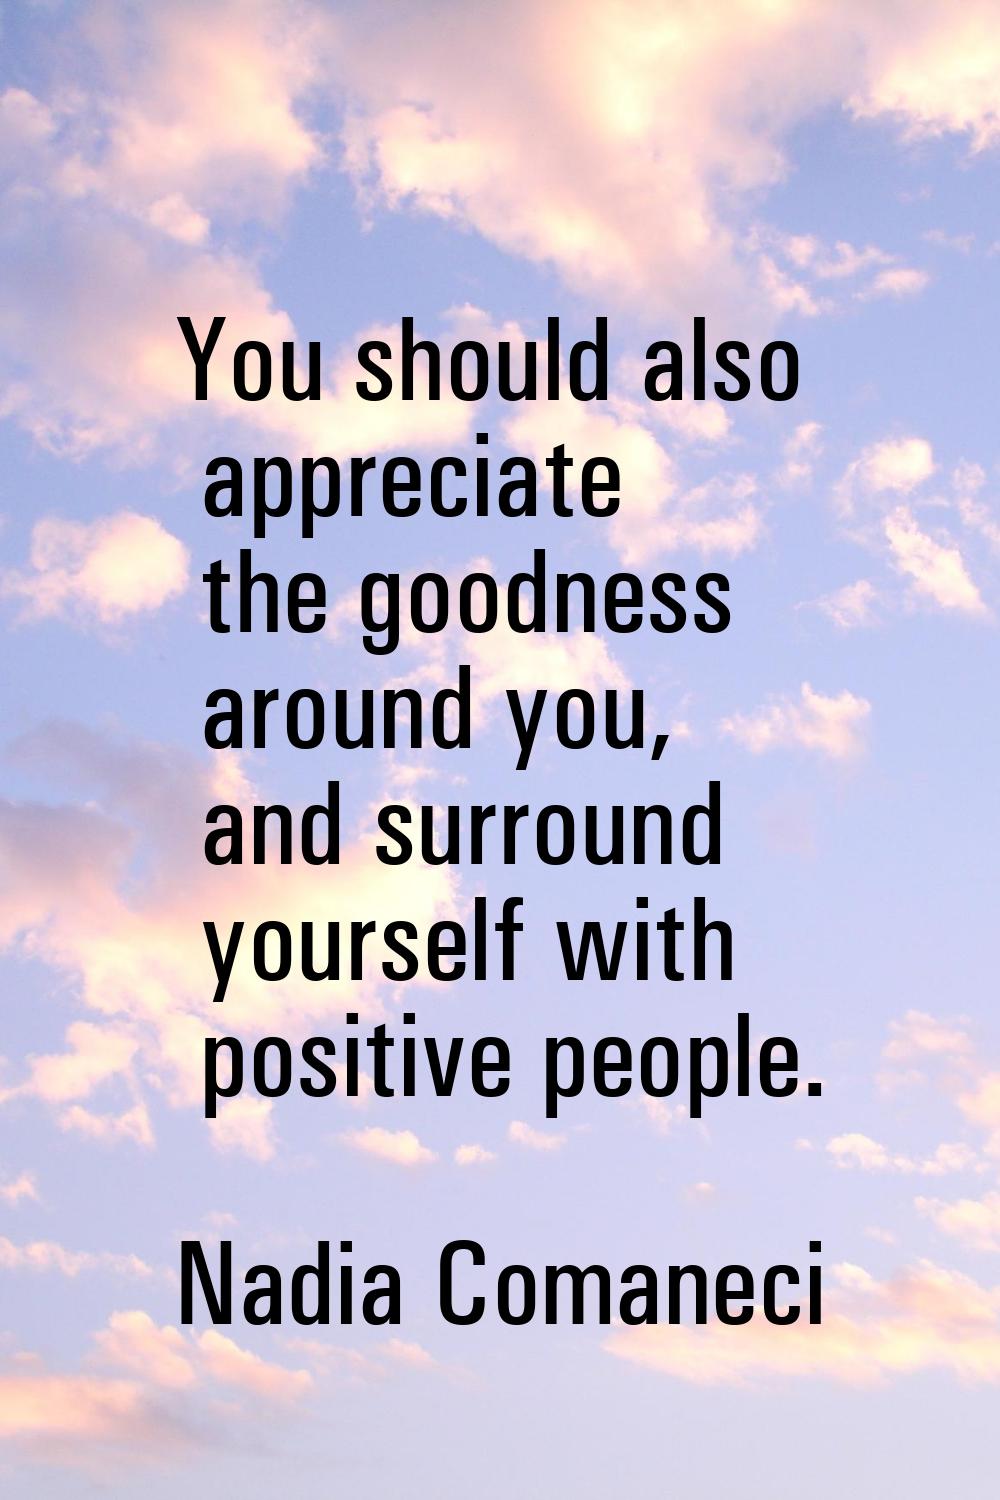 You should also appreciate the goodness around you, and surround yourself with positive people.